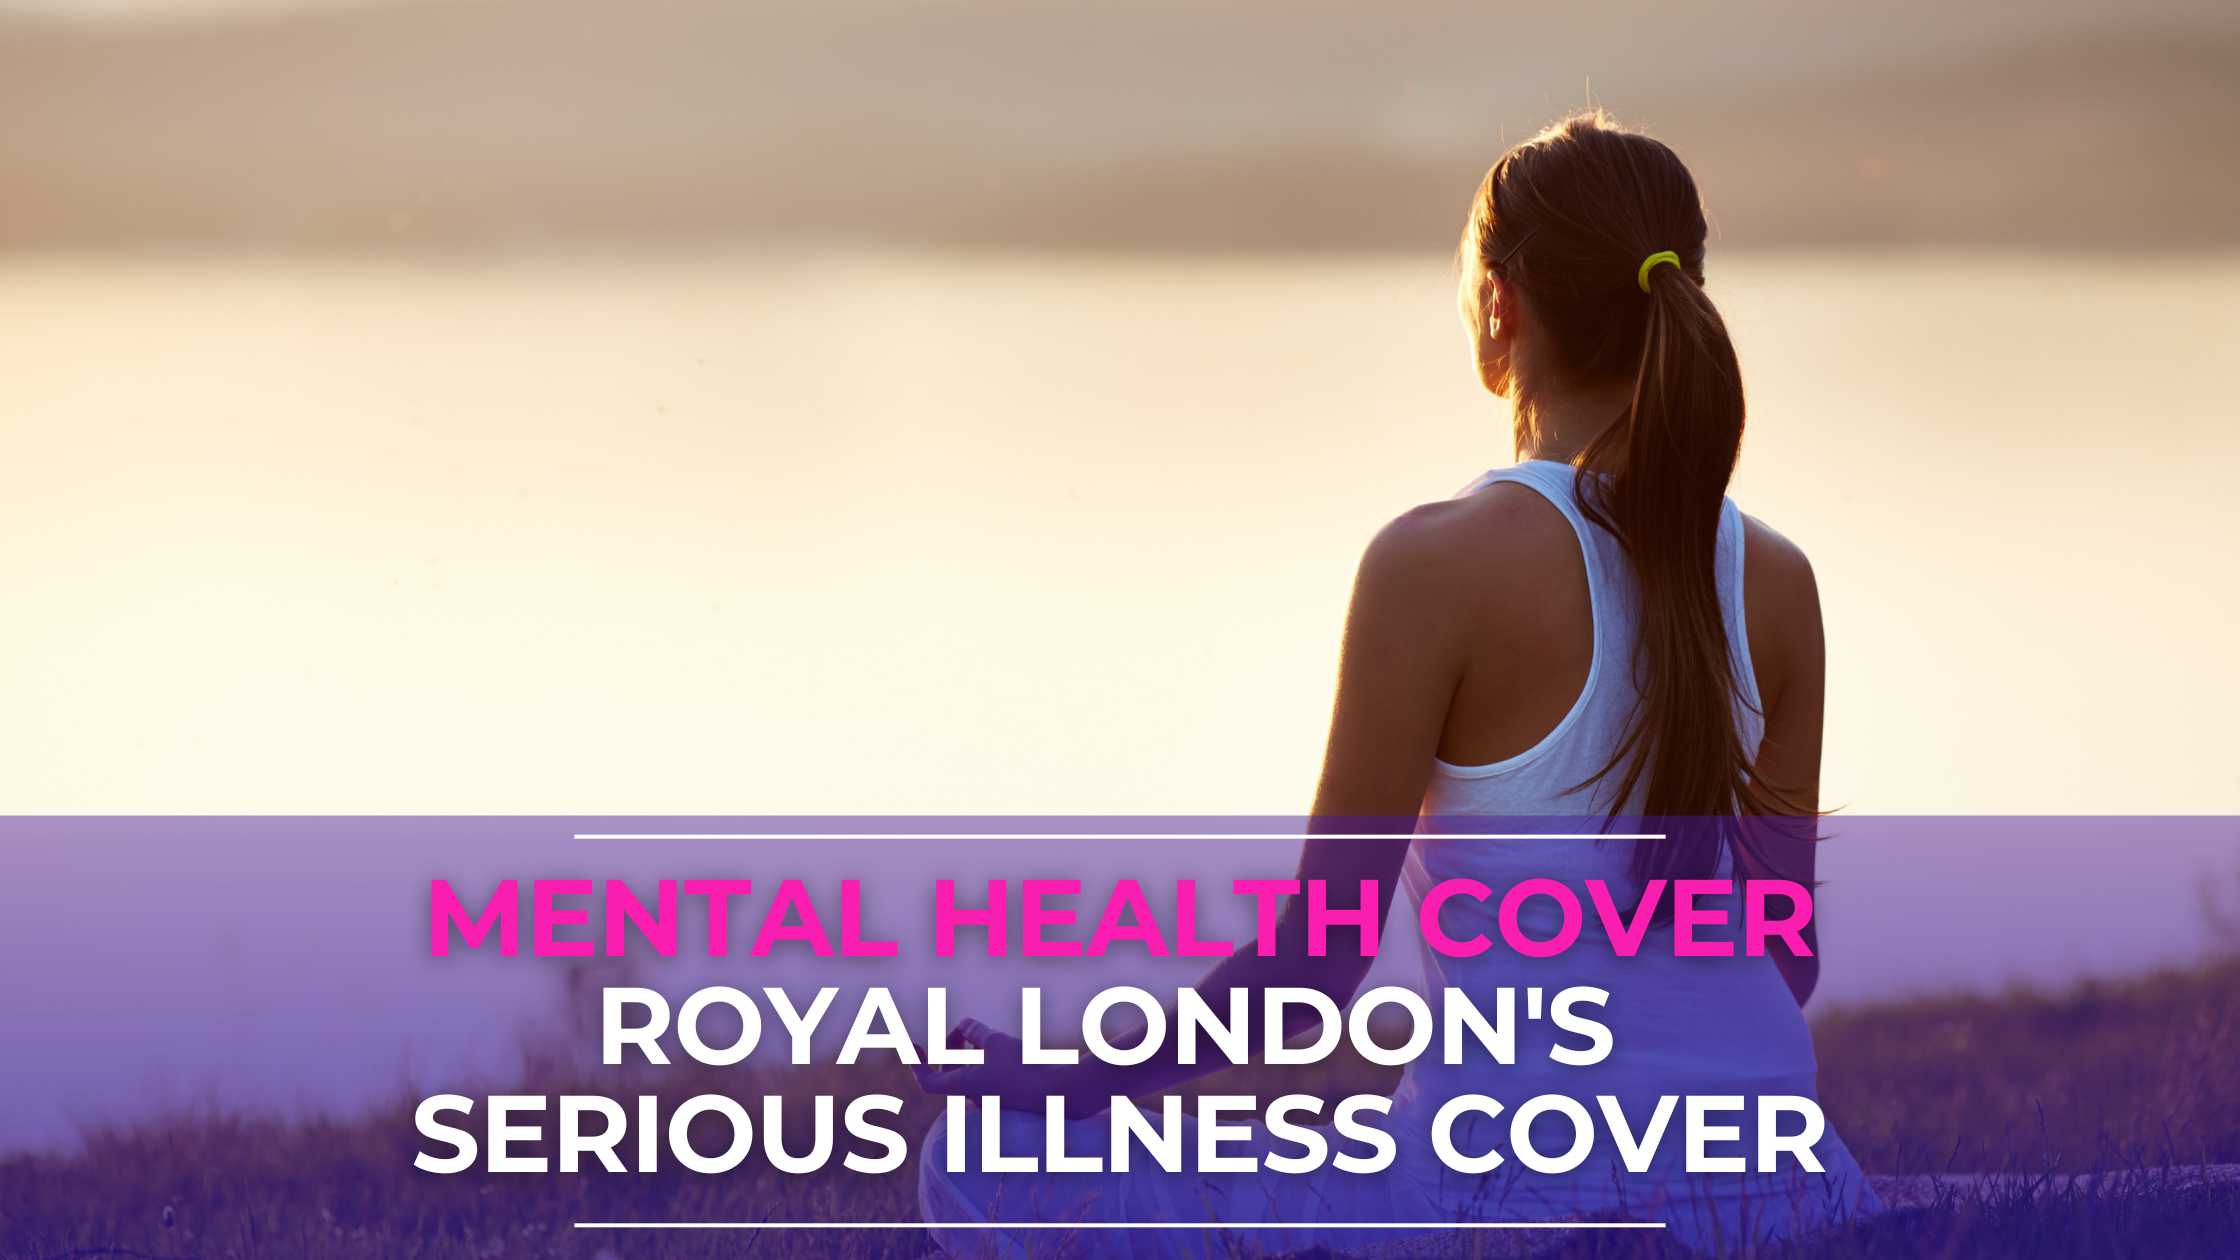 Mental Health Cover Included in Royal London's Serious Illness Cover - LowQuotes